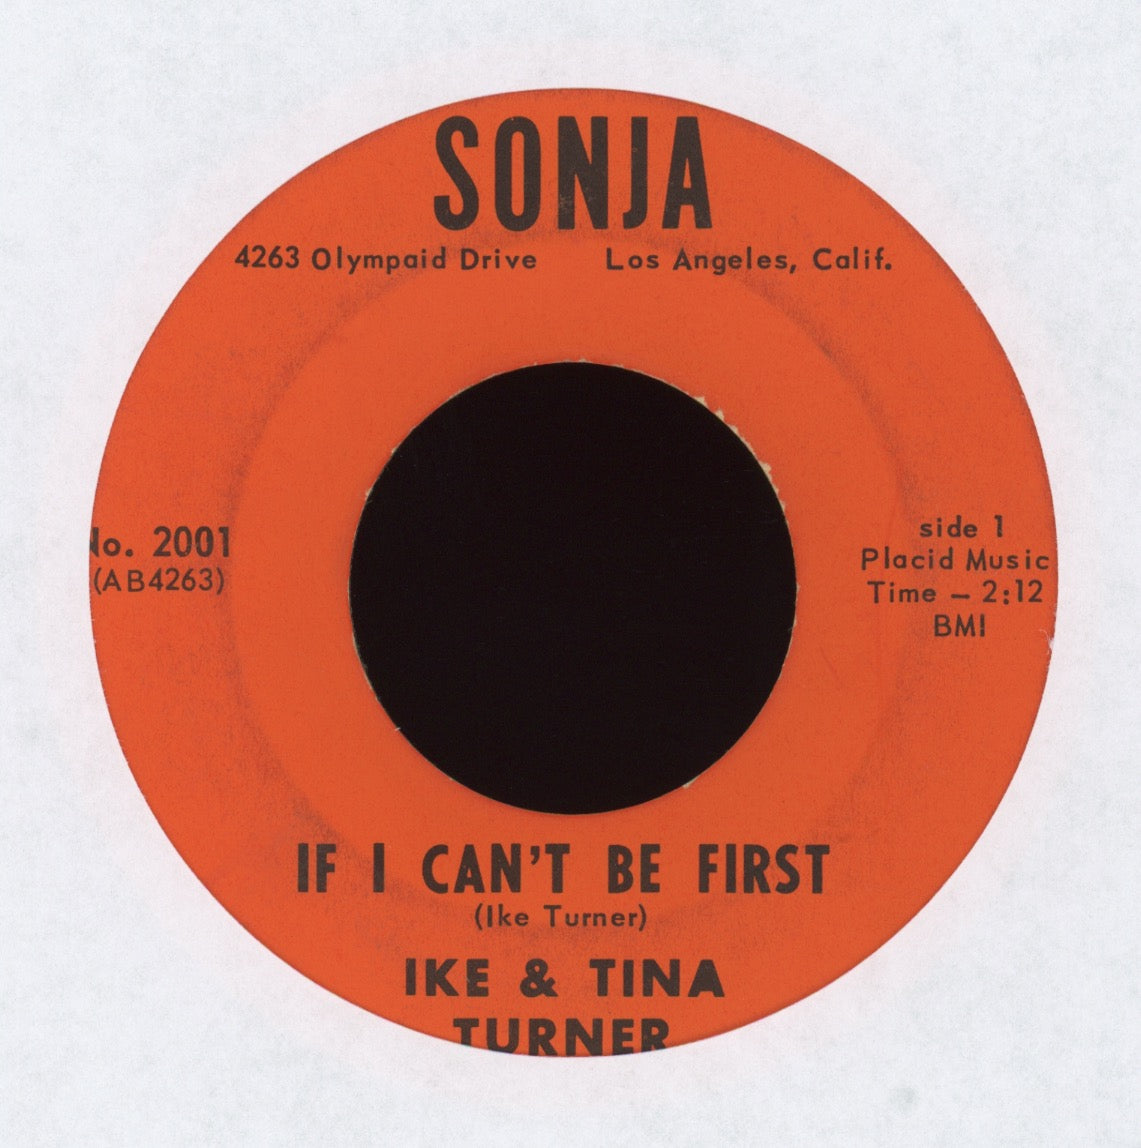 Ike & Tina Turner - If I Can't Be First on Sonja